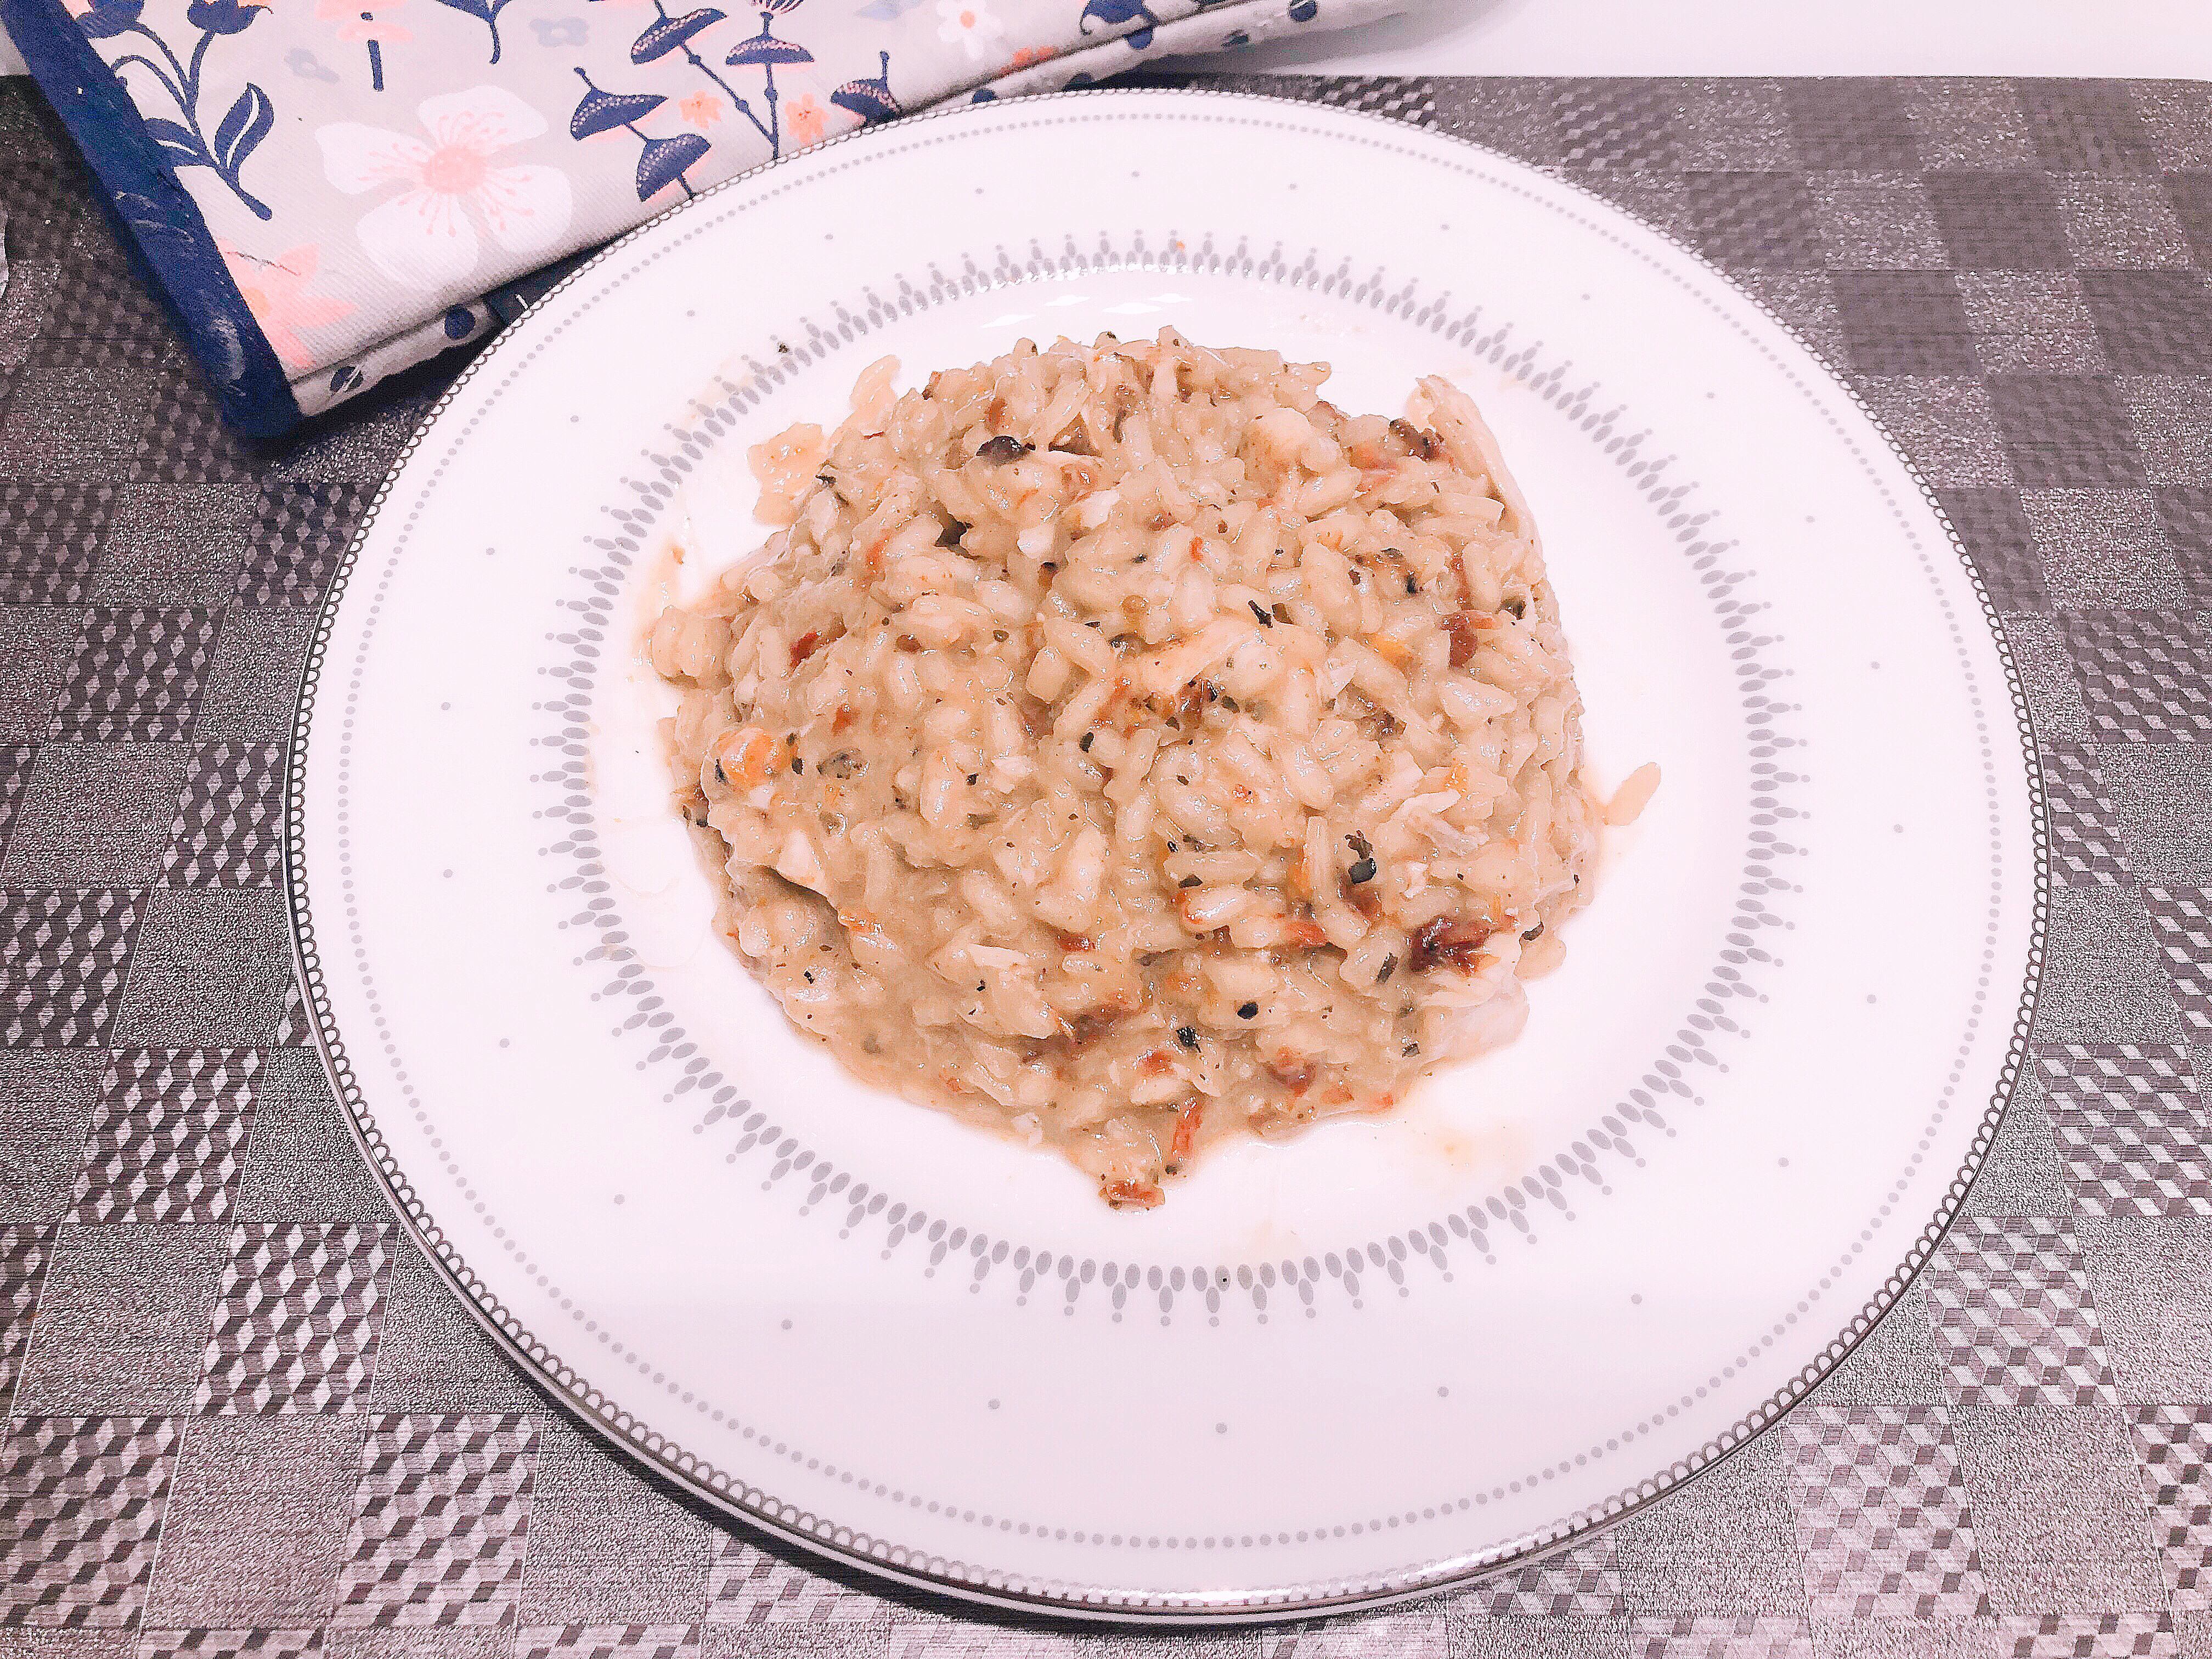 Cook risotto at home